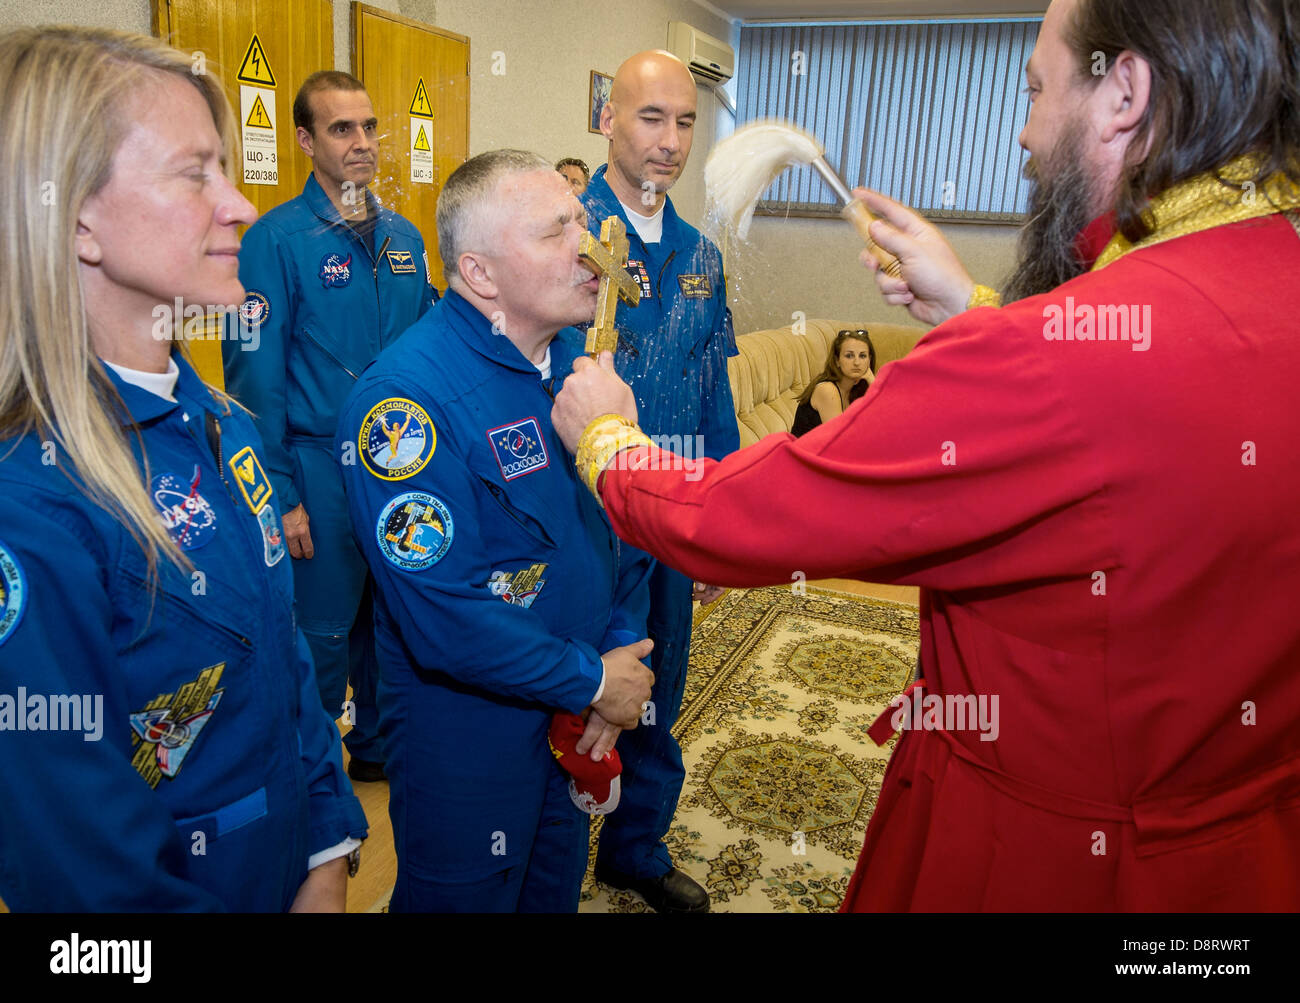 Expedition 36/37 Flight Engineer Karen Nyberg of NASA, left, Soyuz Commander Fyodor Yurchikhin of the Russian Federal Space Agency, center, and Flight Engineer Luca Parmitano of the European Space Agency, receive a traditional blessing from an Orthodox Priest prior to the three crew members departing the Cosmonaut Hotel for suit up and launch onboard a Soyuz to the International Space Station May 28, 2013 in Baikonur Kazakhstan. Stock Photo